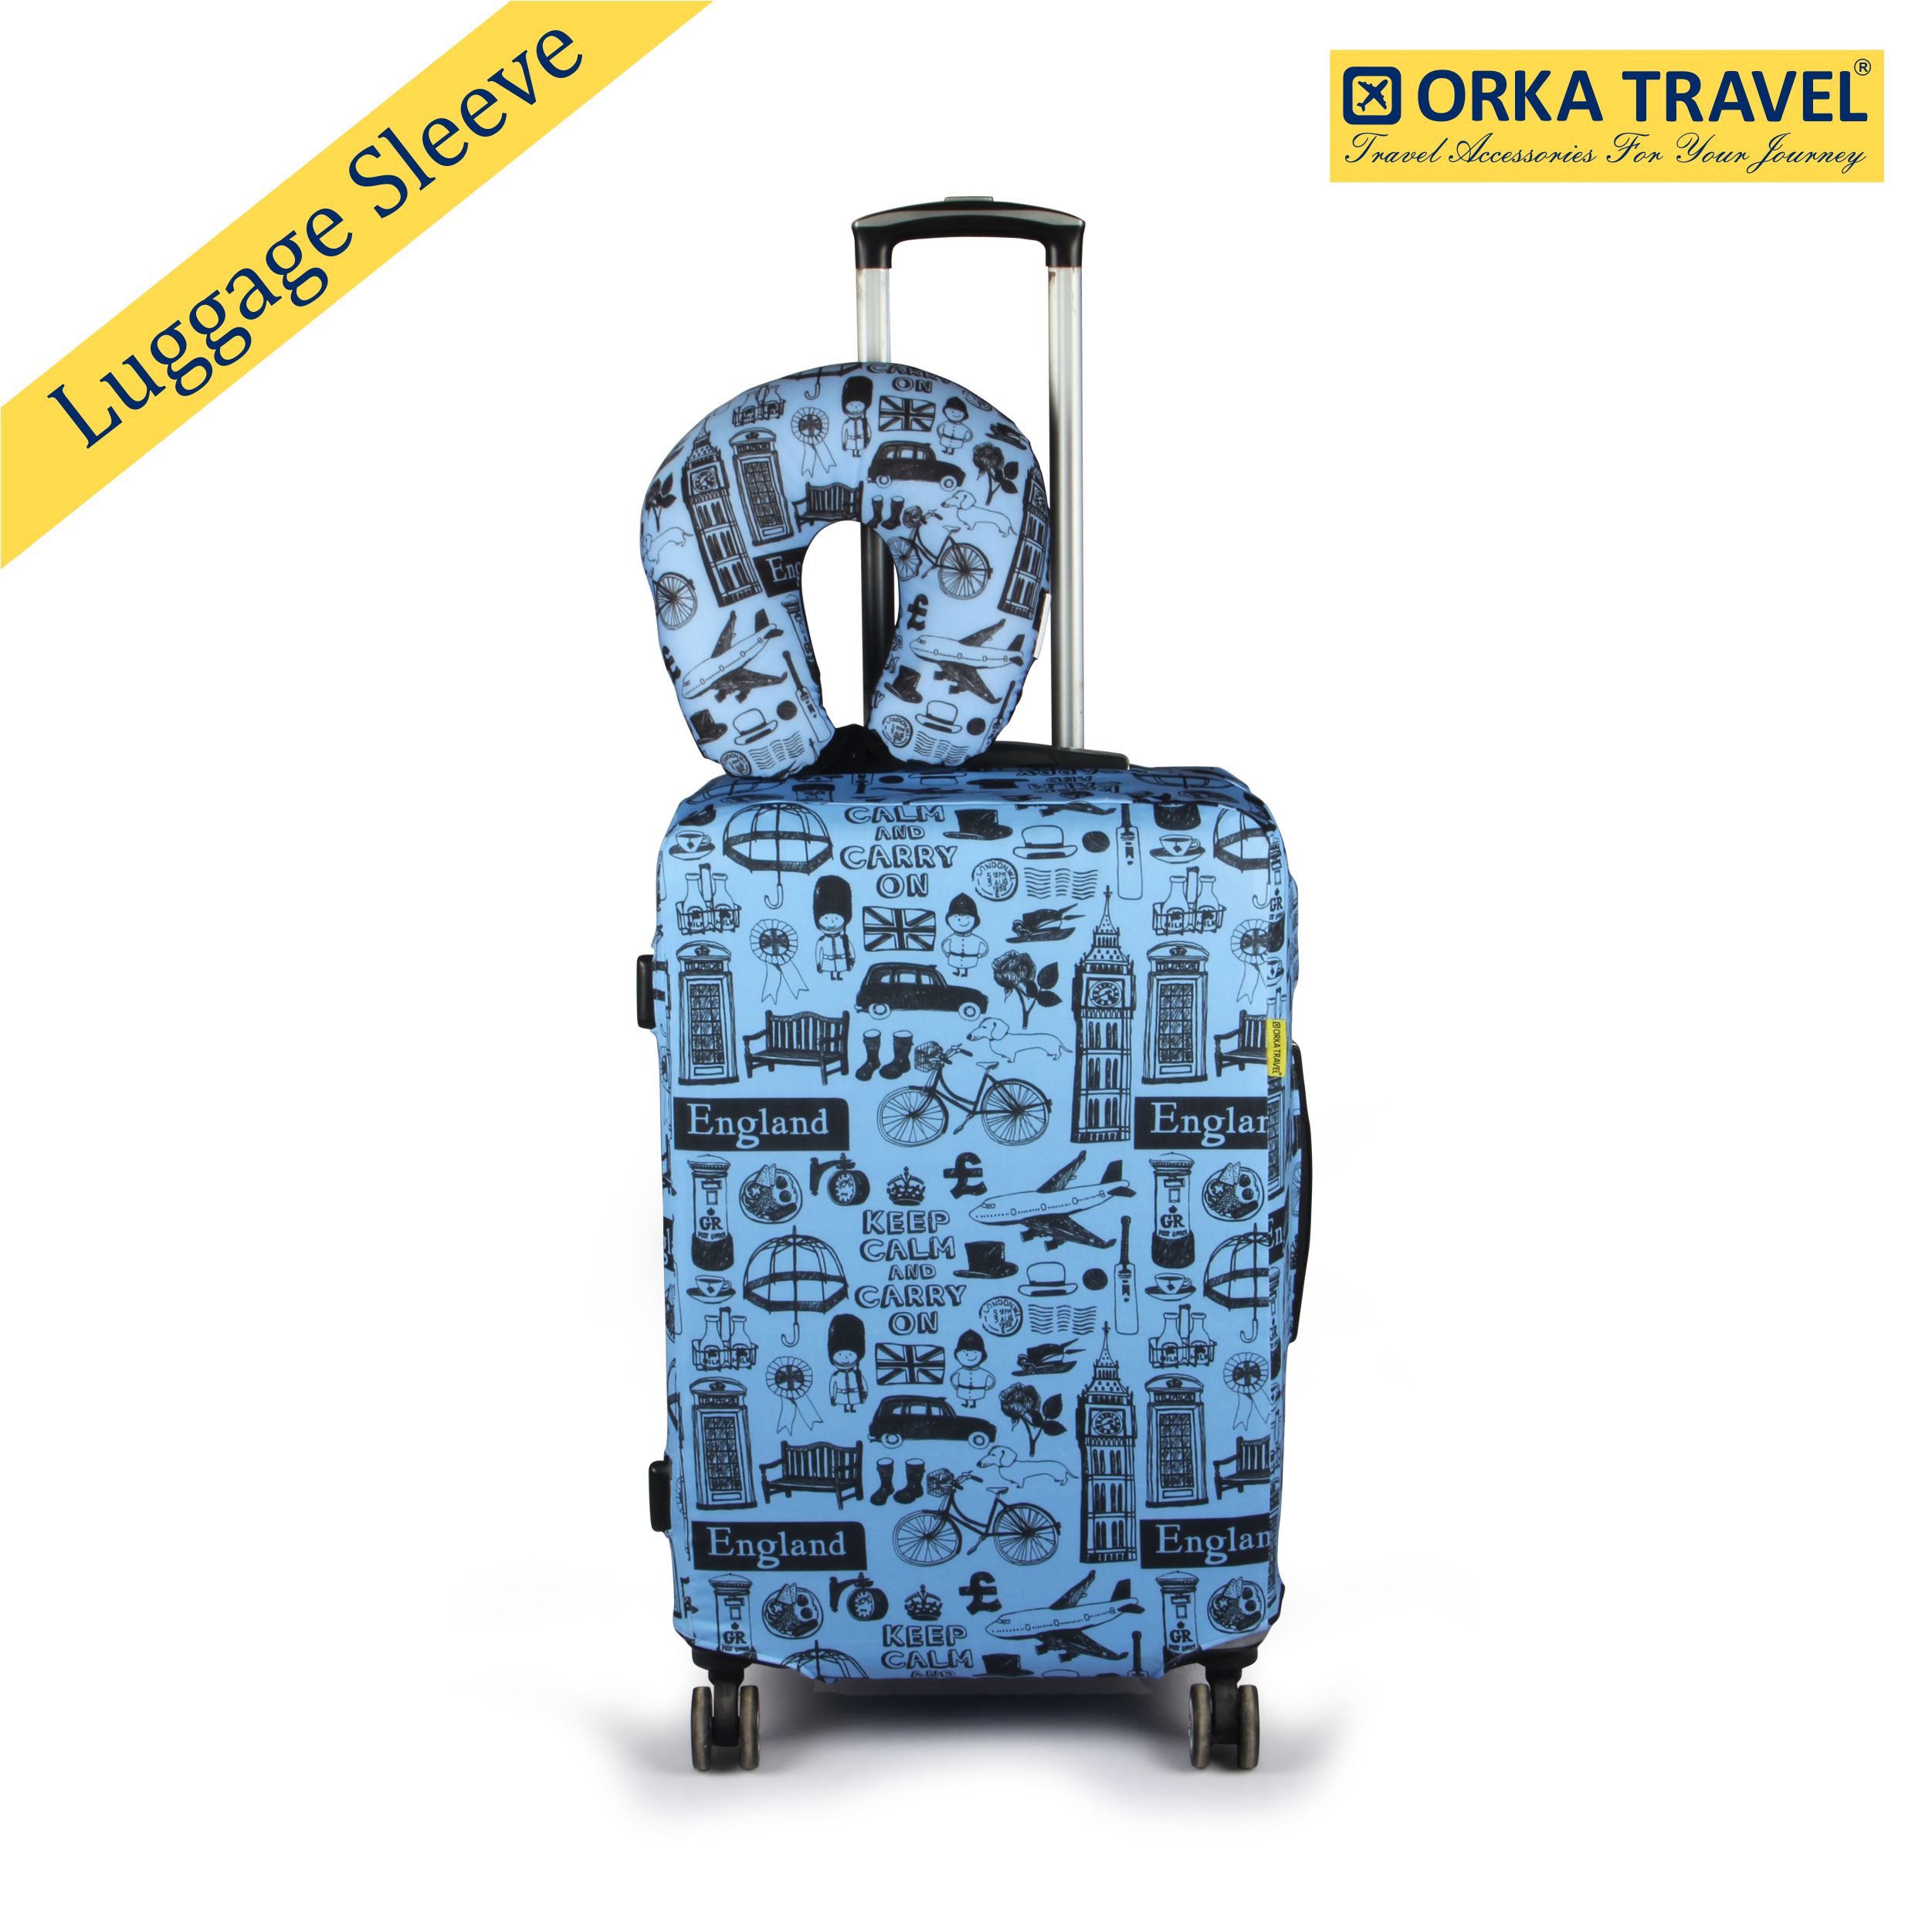 ORKA TRAVEL Keep Calm THEME LUGGAGE PROTECTOR WITH MATCHING U NECK PILLOW LUGGAGE COVER  